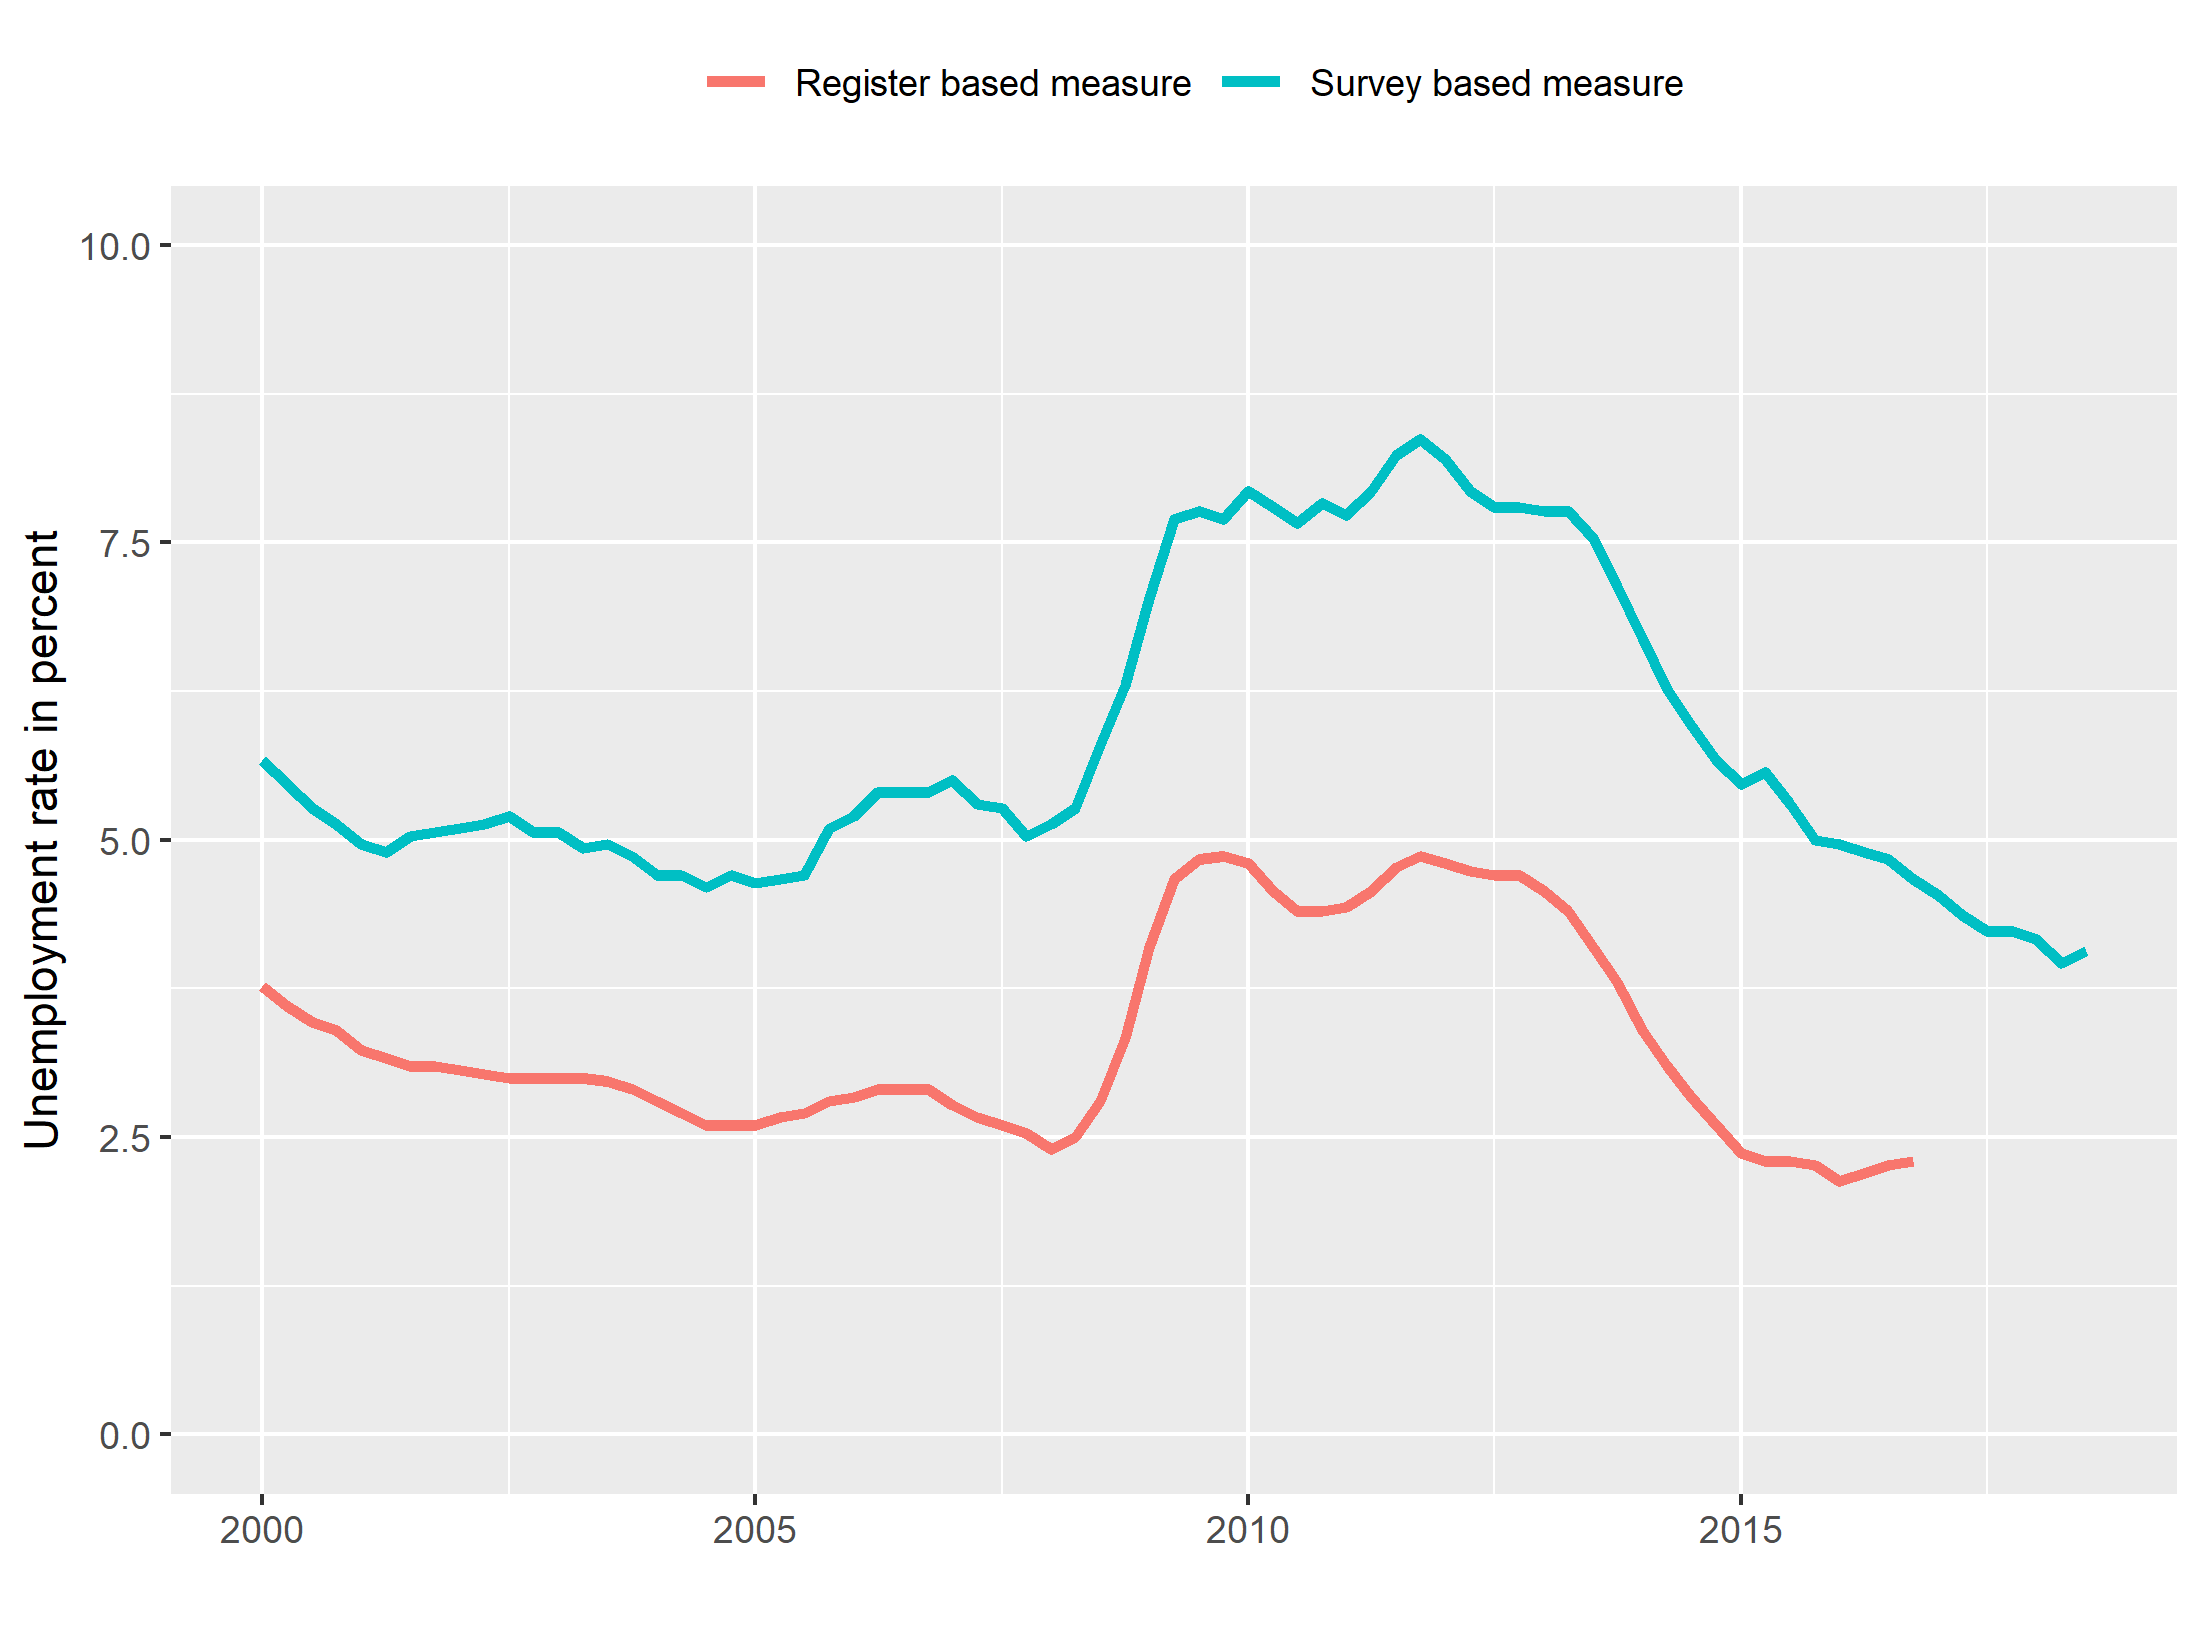 The unemployment rate in the United Kingdom, using two different measures of unemployment. Data source: OECD 